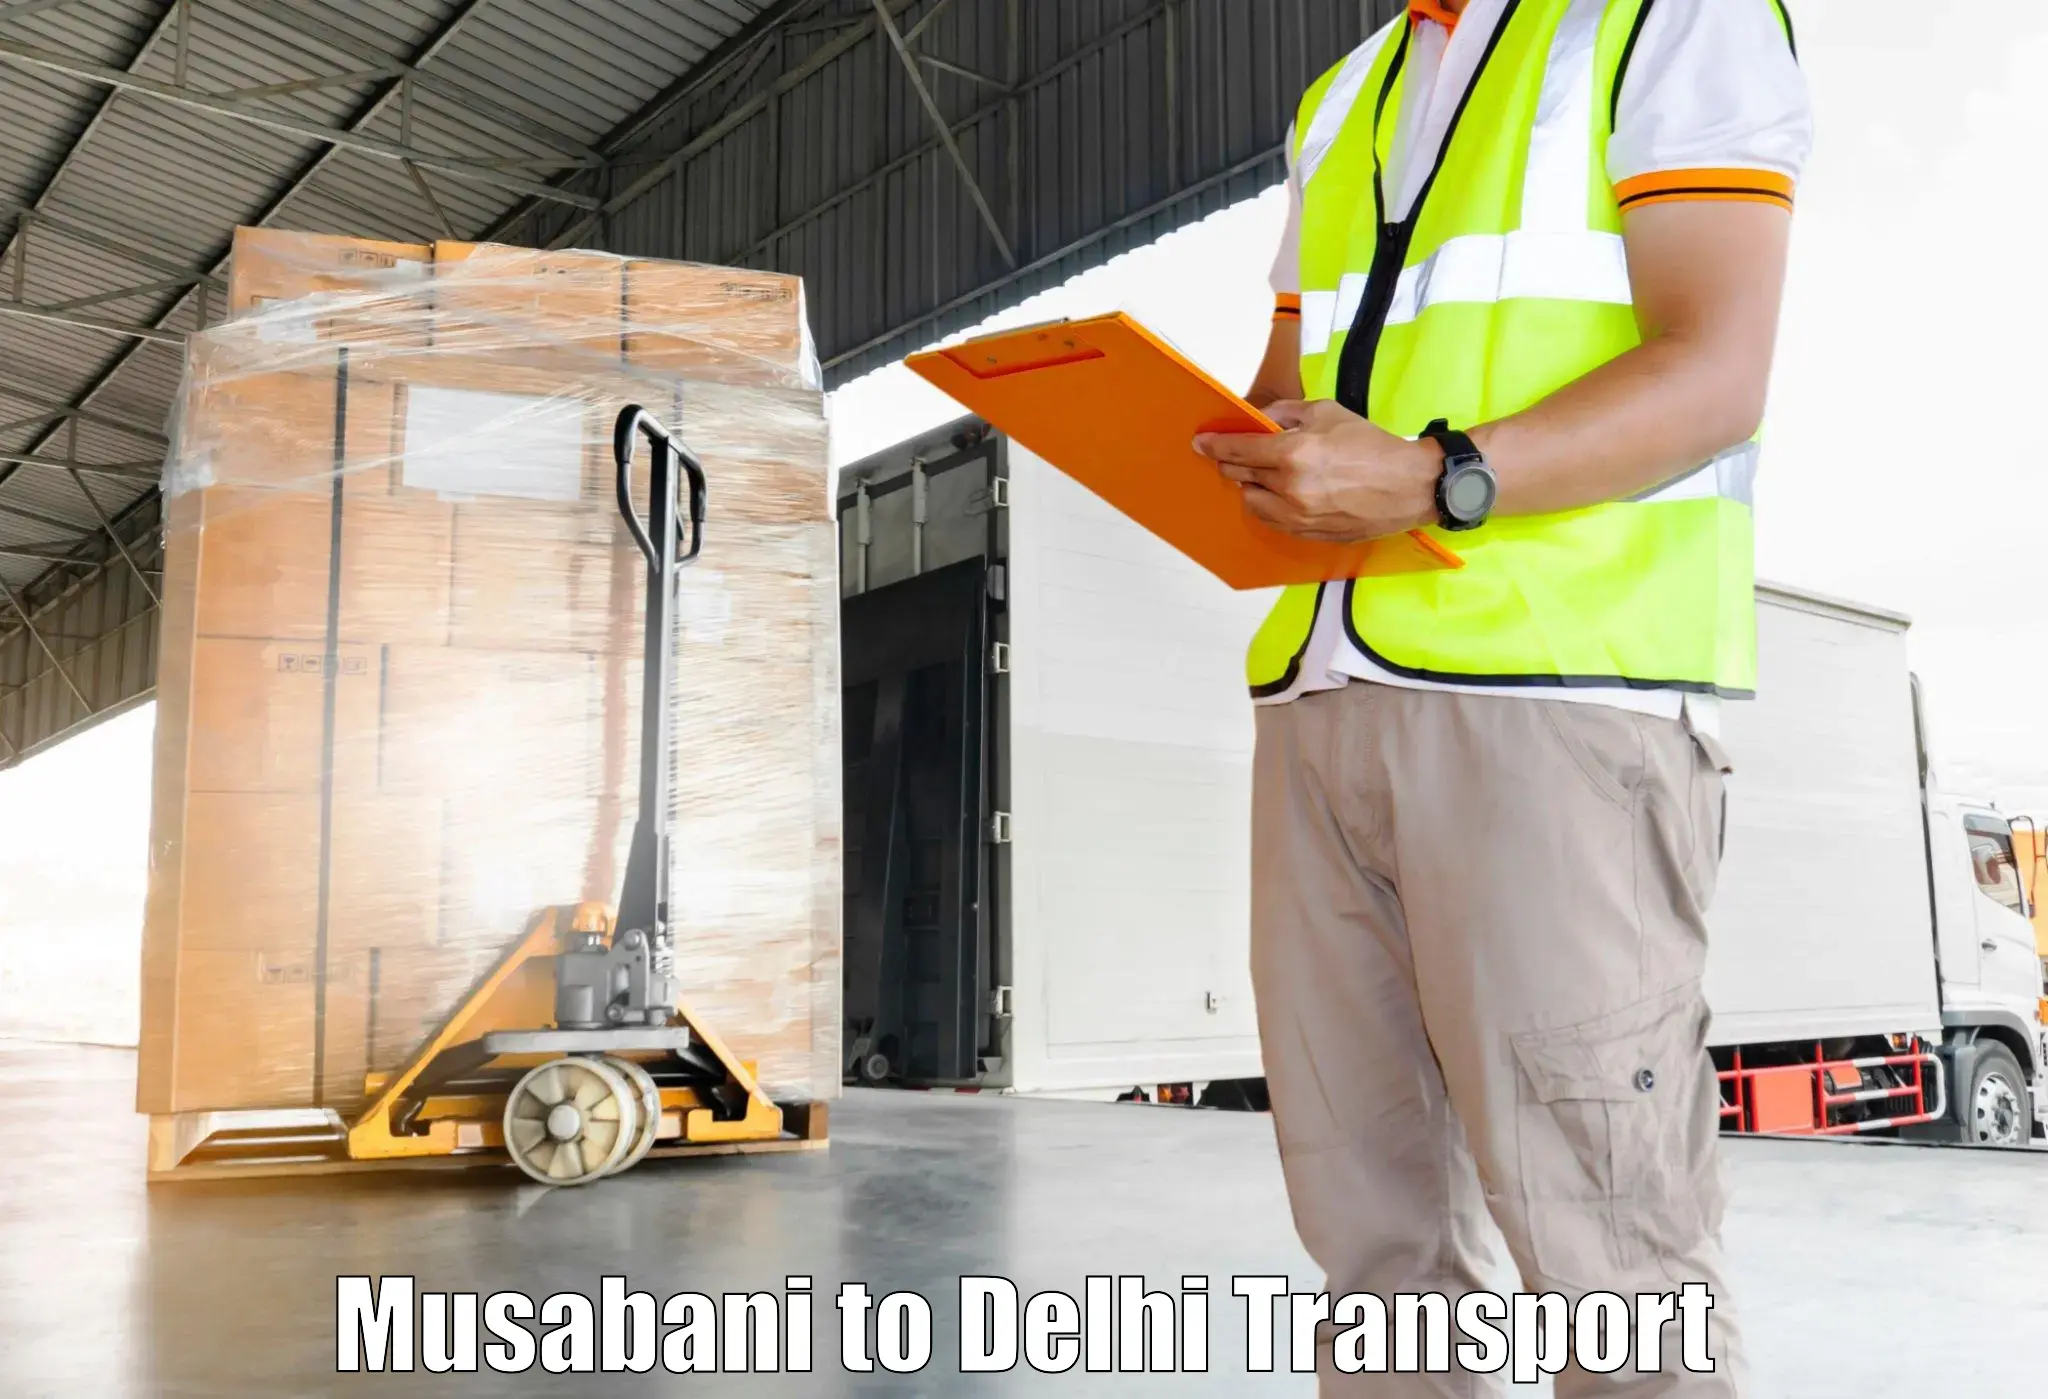 Transport bike from one state to another Musabani to Delhi